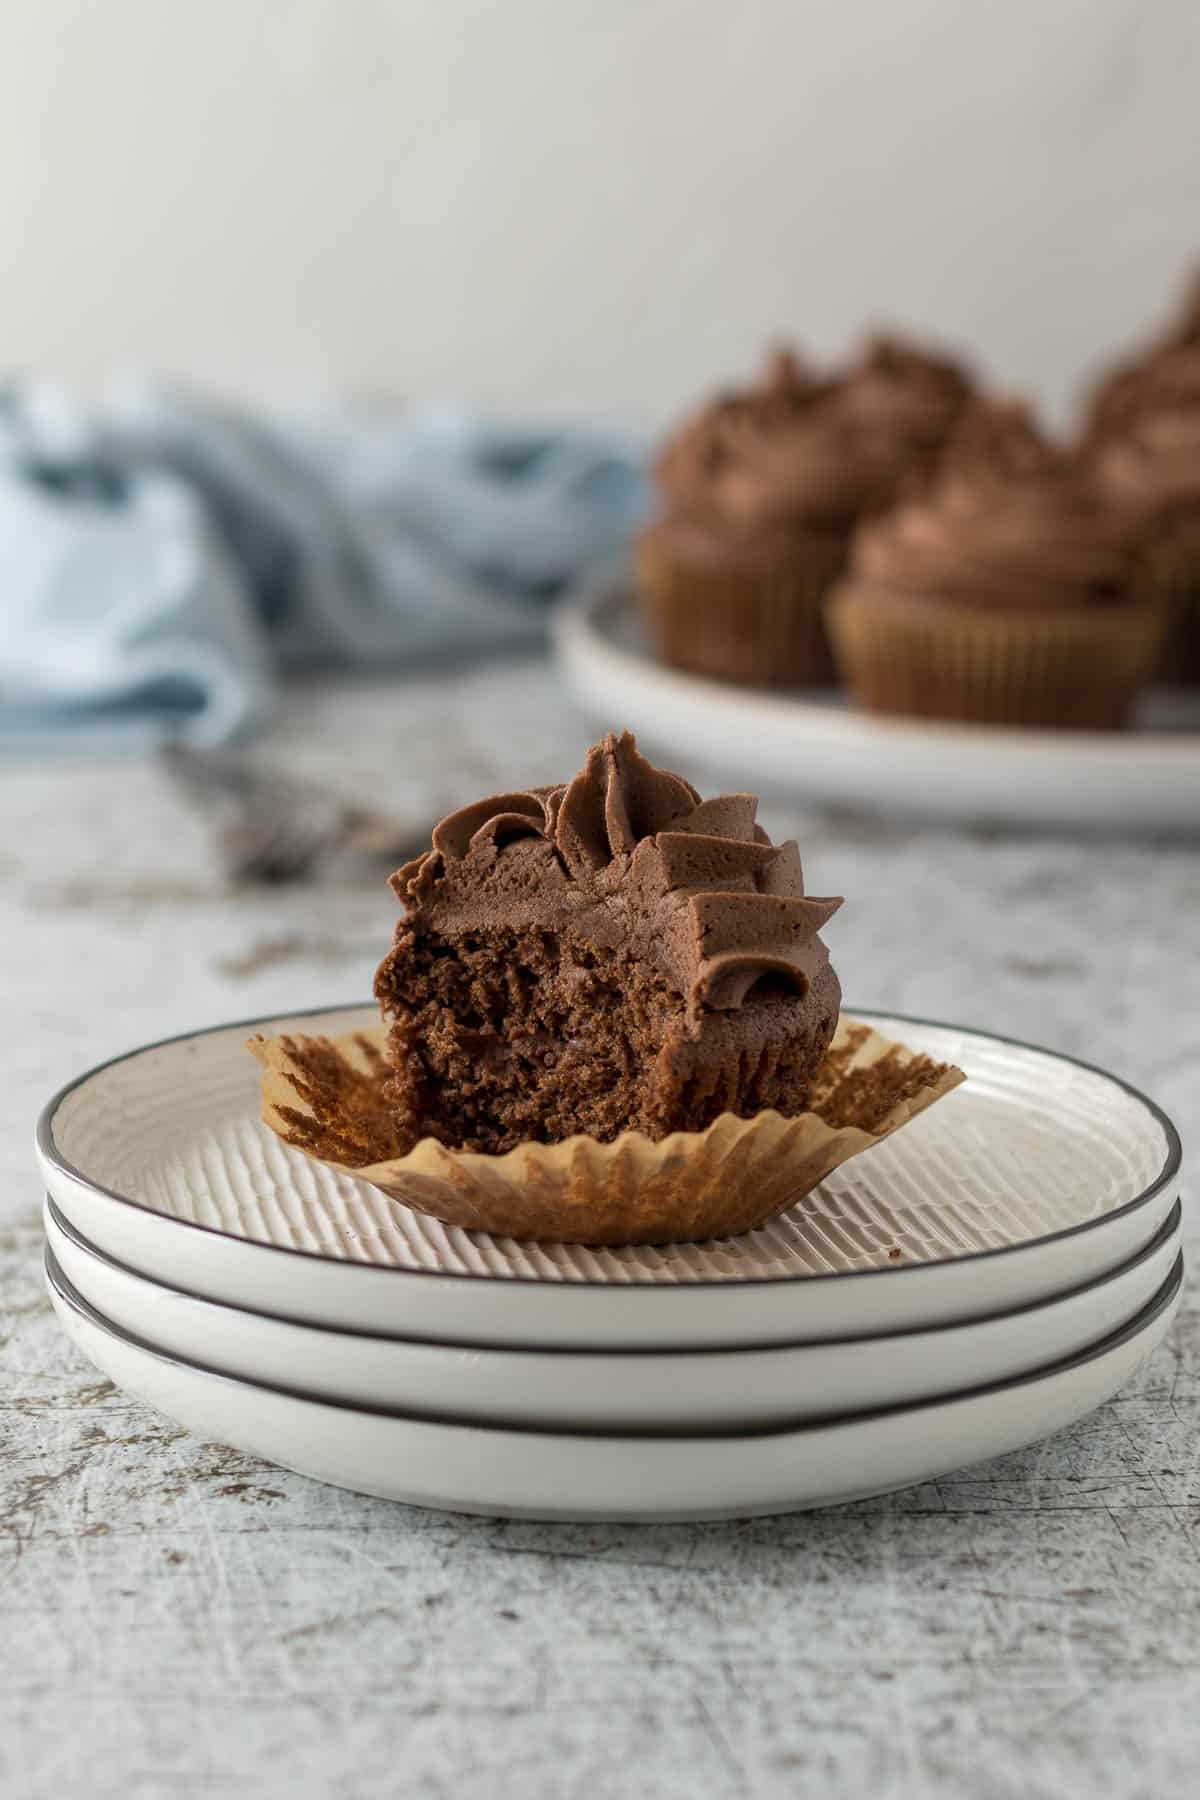 Chocolate cupcake with a bite out on a plate.